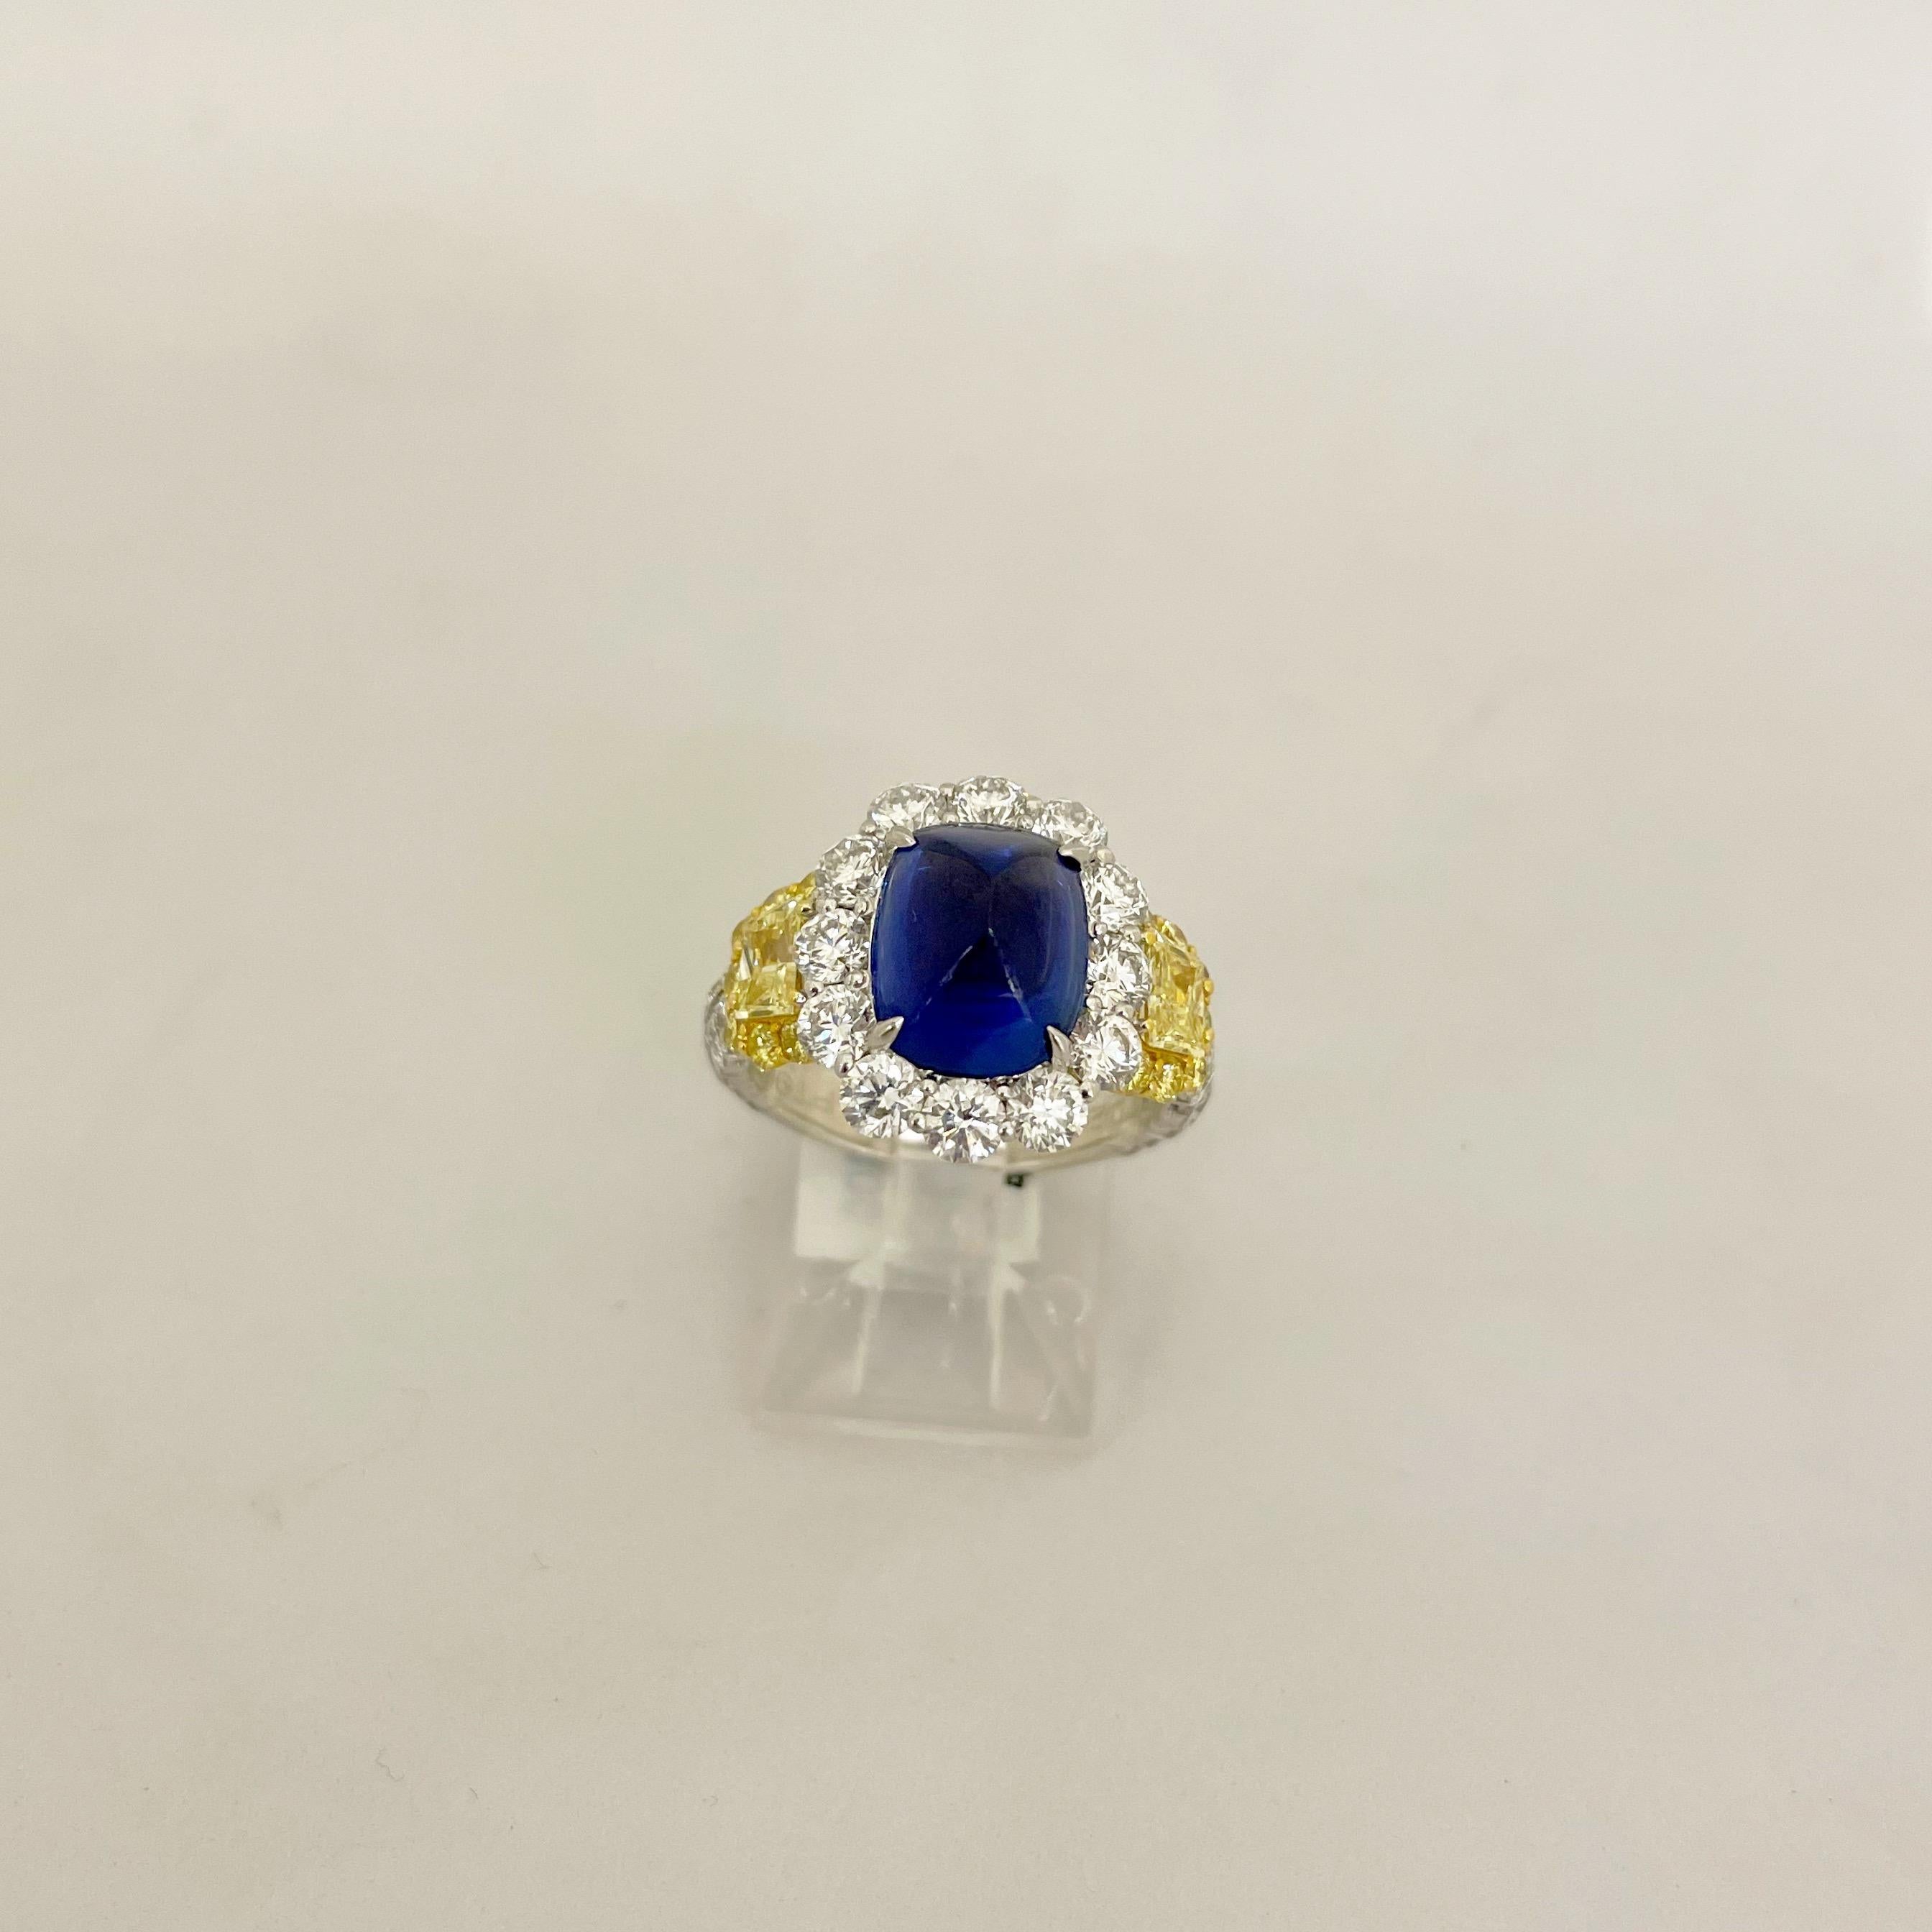 Women's or Men's Cellini Plat/18KT 4.27Ct. Sugarloaf Sapphire, Fancy Yellow & White Diamond Ring For Sale